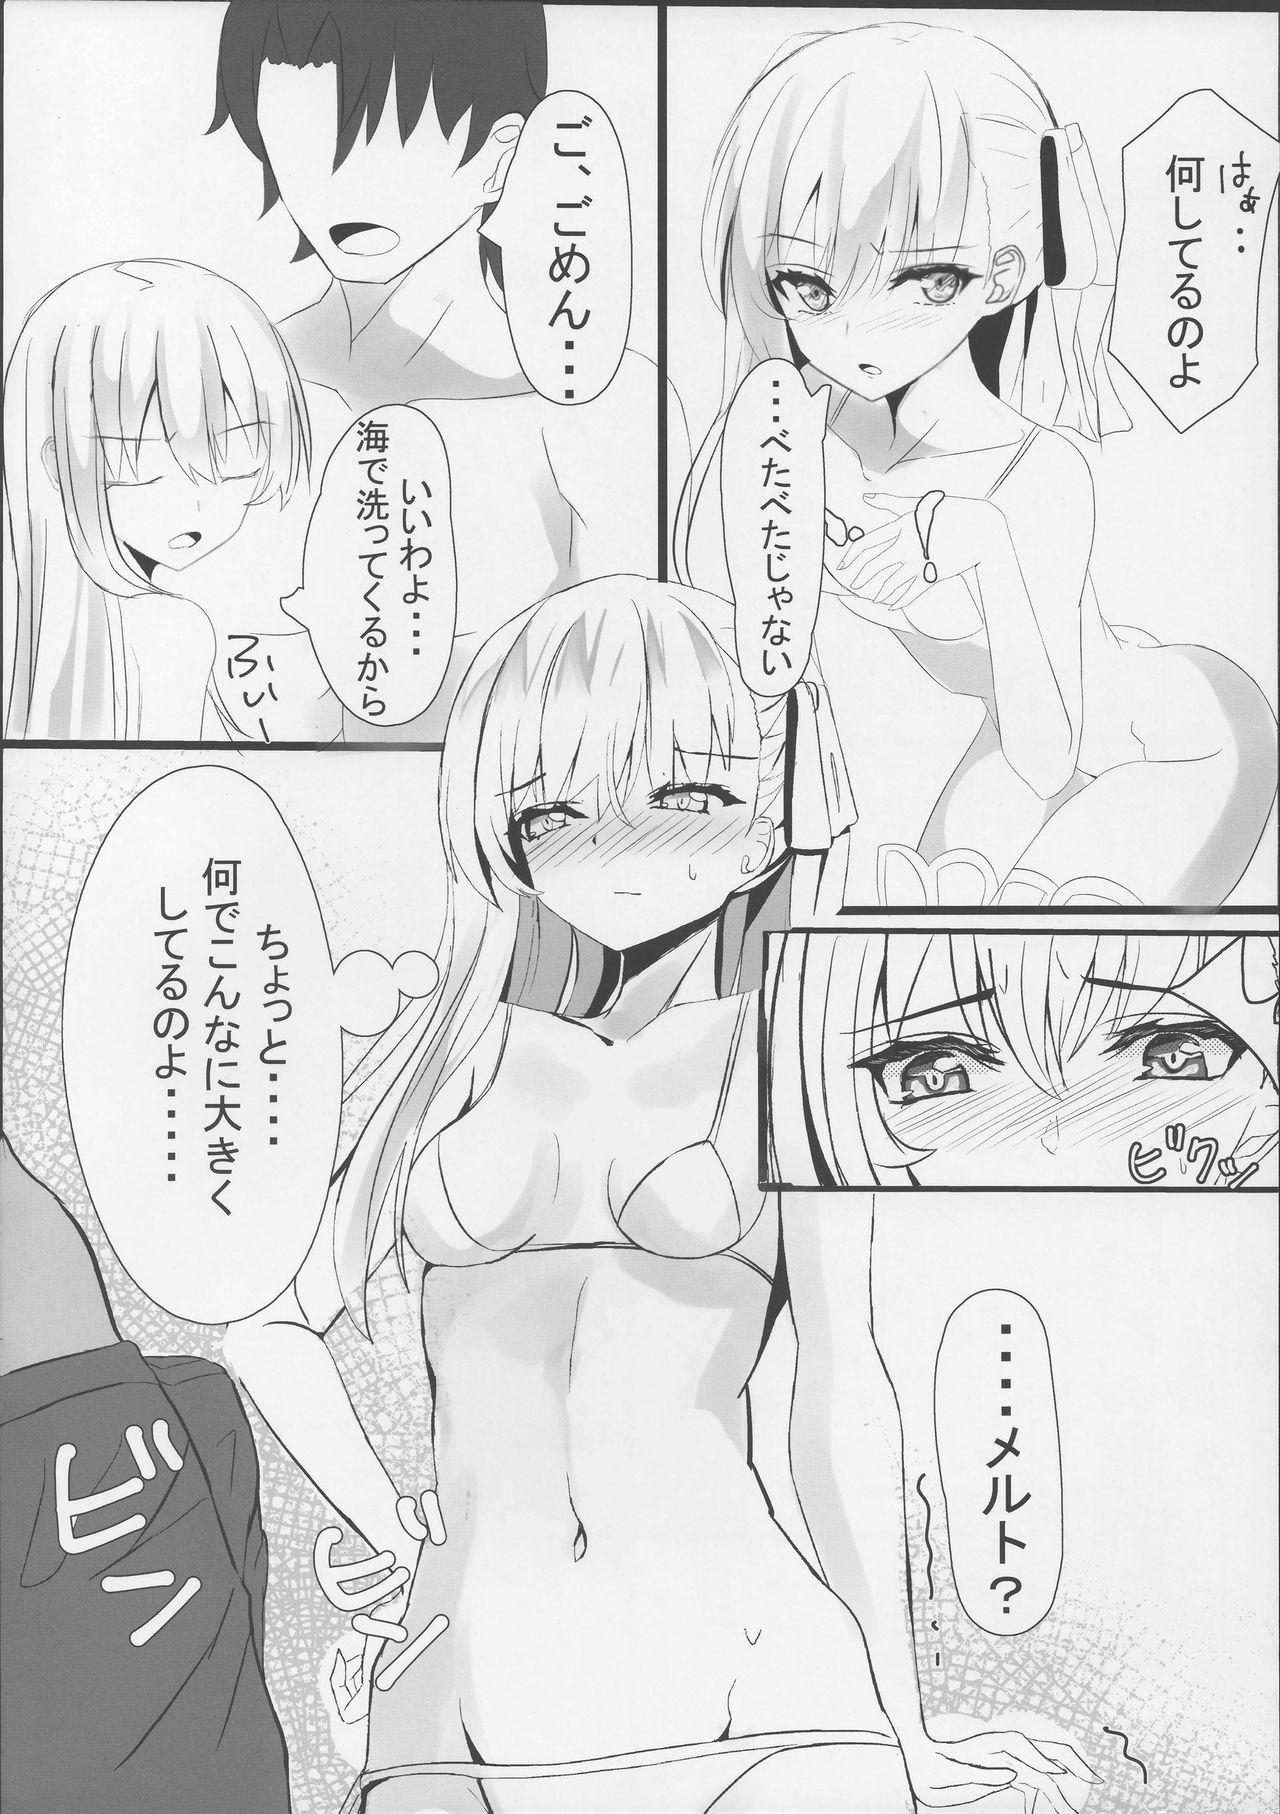 18 Year Old Melt down 2 - Fate grand order Thylinh - Page 7